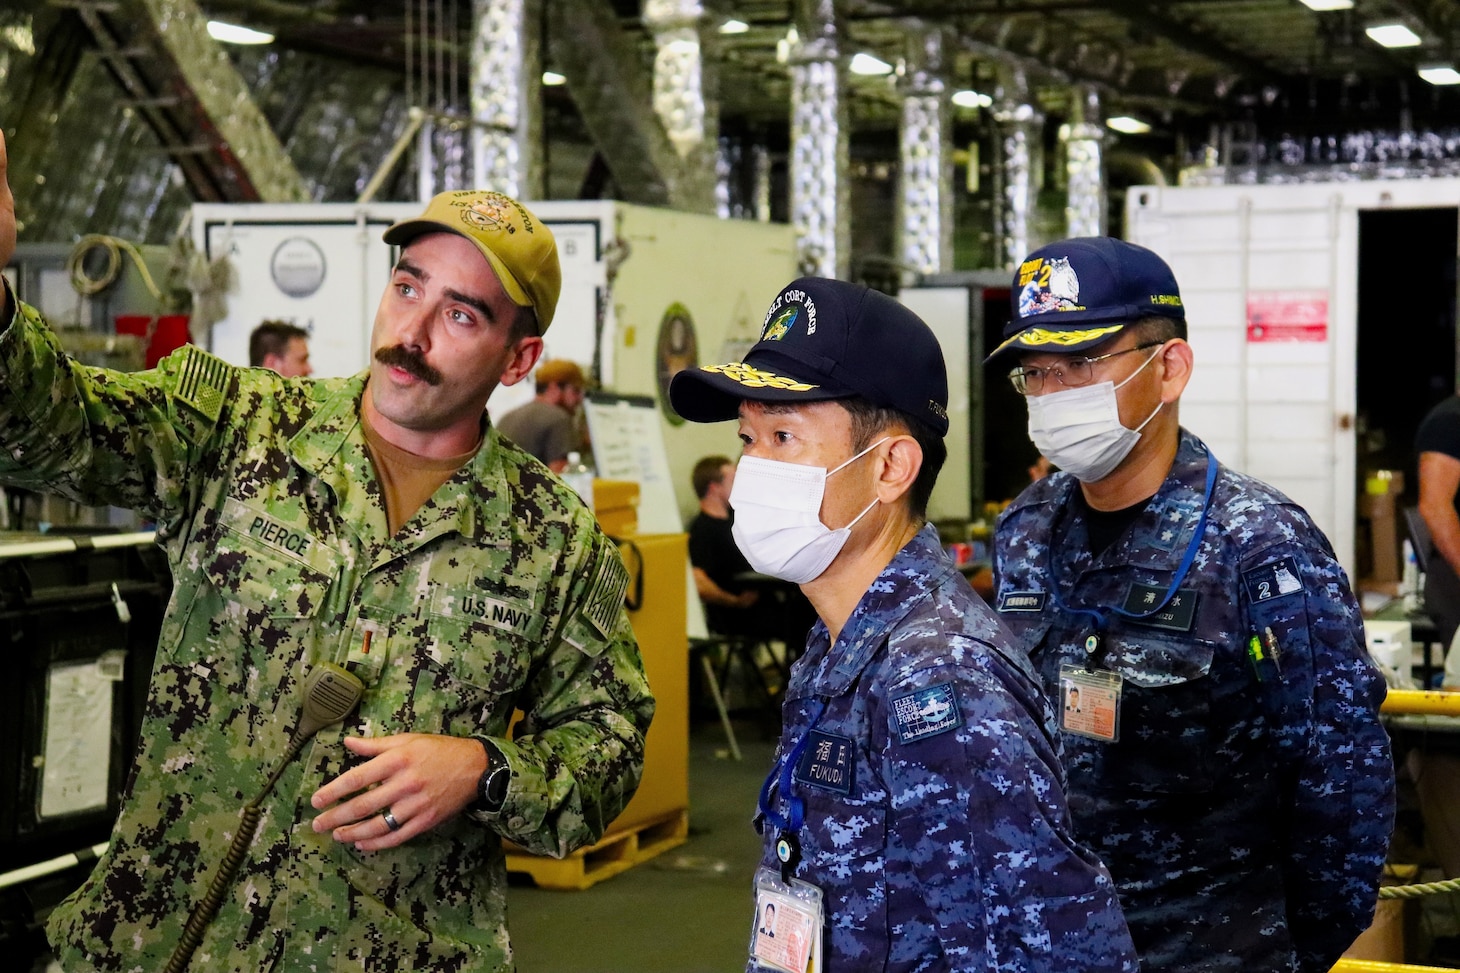 SASEBO, Japan (June 1, 2022) Ensign David Pierce, from Pittsburgh, explains to Japan Maritime Self-Defense Force Vice Adm. FUKUDA Tatsuya, commander, Fleet Escort Force, and Rear Adm. SHIMIZU Hitoshi, commander, Escort Flotilla Two, how the twin-boom extensible crane (TBEC) is utilized to launch an 11m rigid-hulled inflatable boat (RHIB) out of the stern on the Independence-class littoral combat ship USS Charleston (LCS 18). Charleston, part of Destroyer Squadron (DESRON) 7, is on a rotational deployment, operating in the U.S. 7th Fleet area of operations to enhance interoperability with partners and serve as a ready-response force in support of a free and open Indo-Pacific region. (U.S. Navy photo by Lt. j.g. James French)